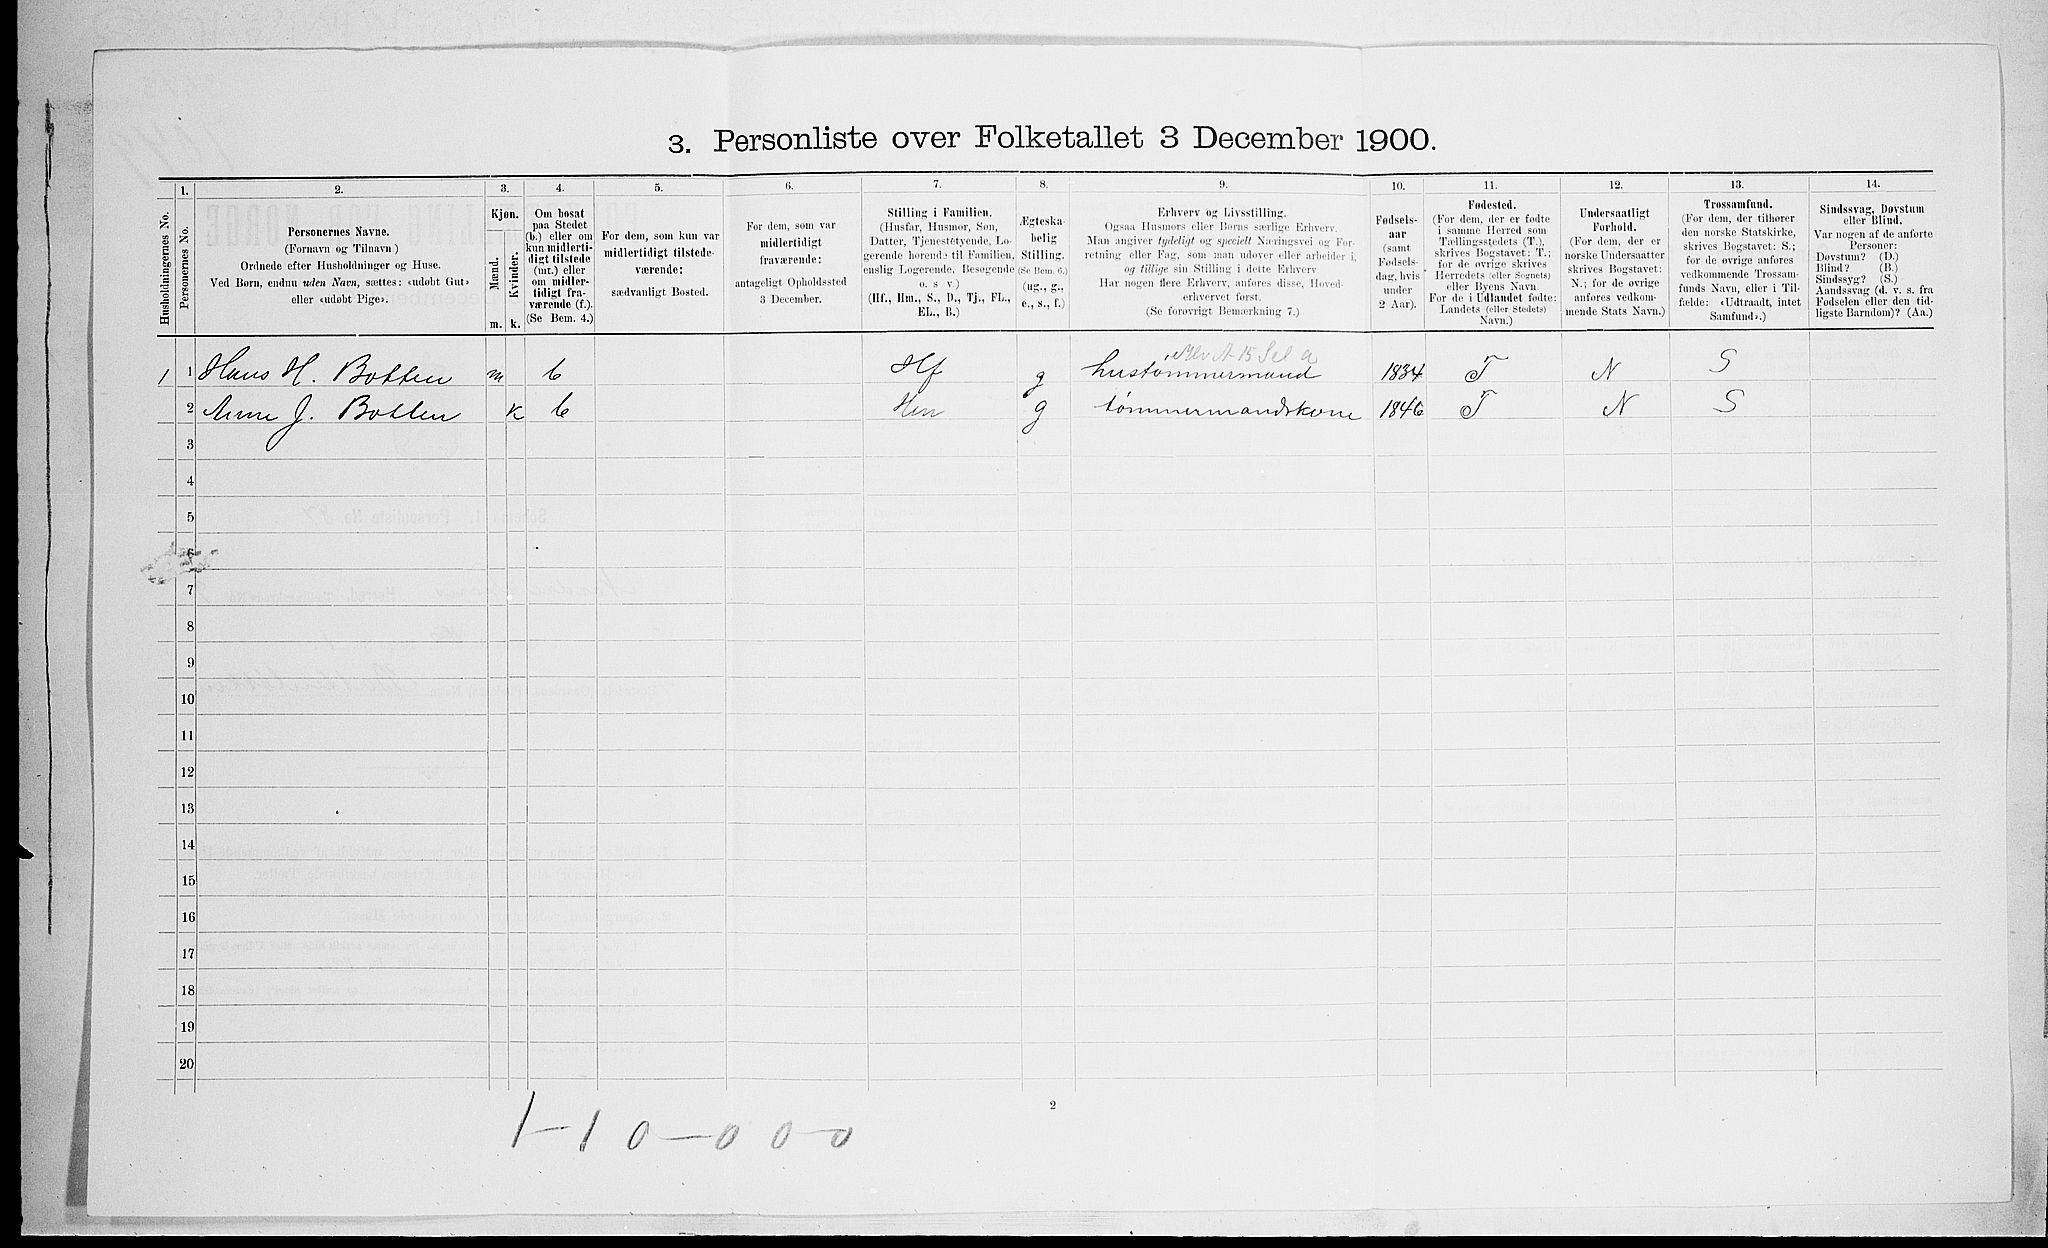 SAH, 1900 census for Nord-Fron, 1900, p. 106